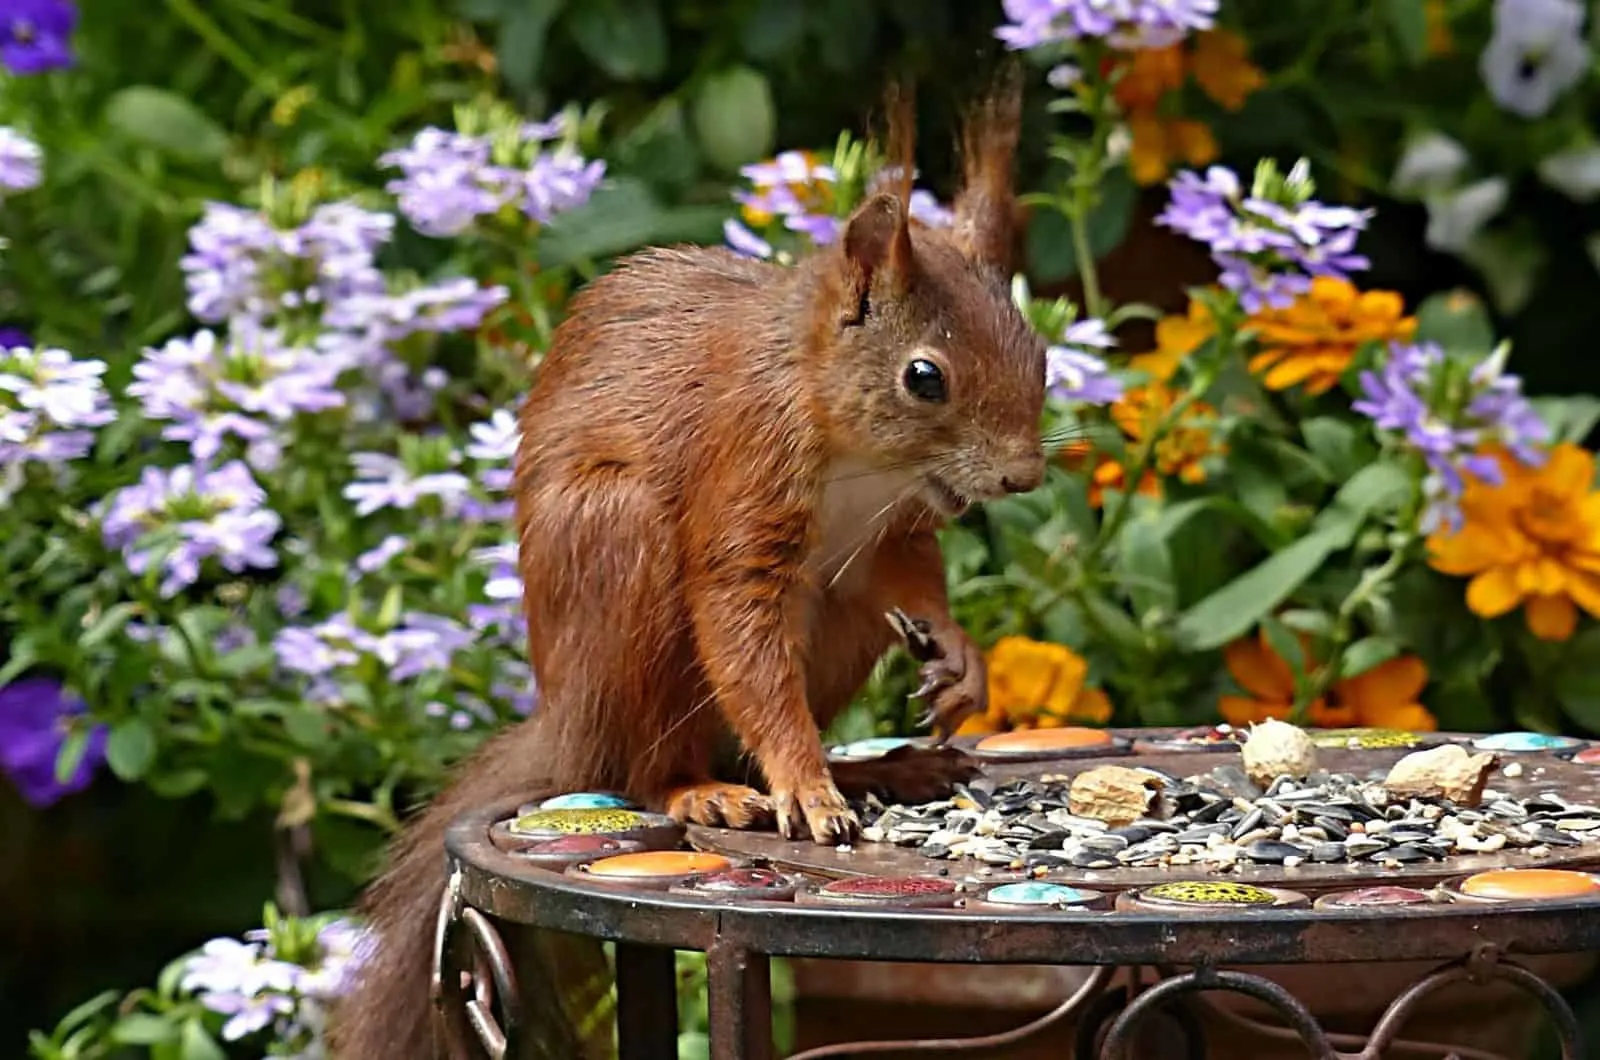 Squirrel eating off the table